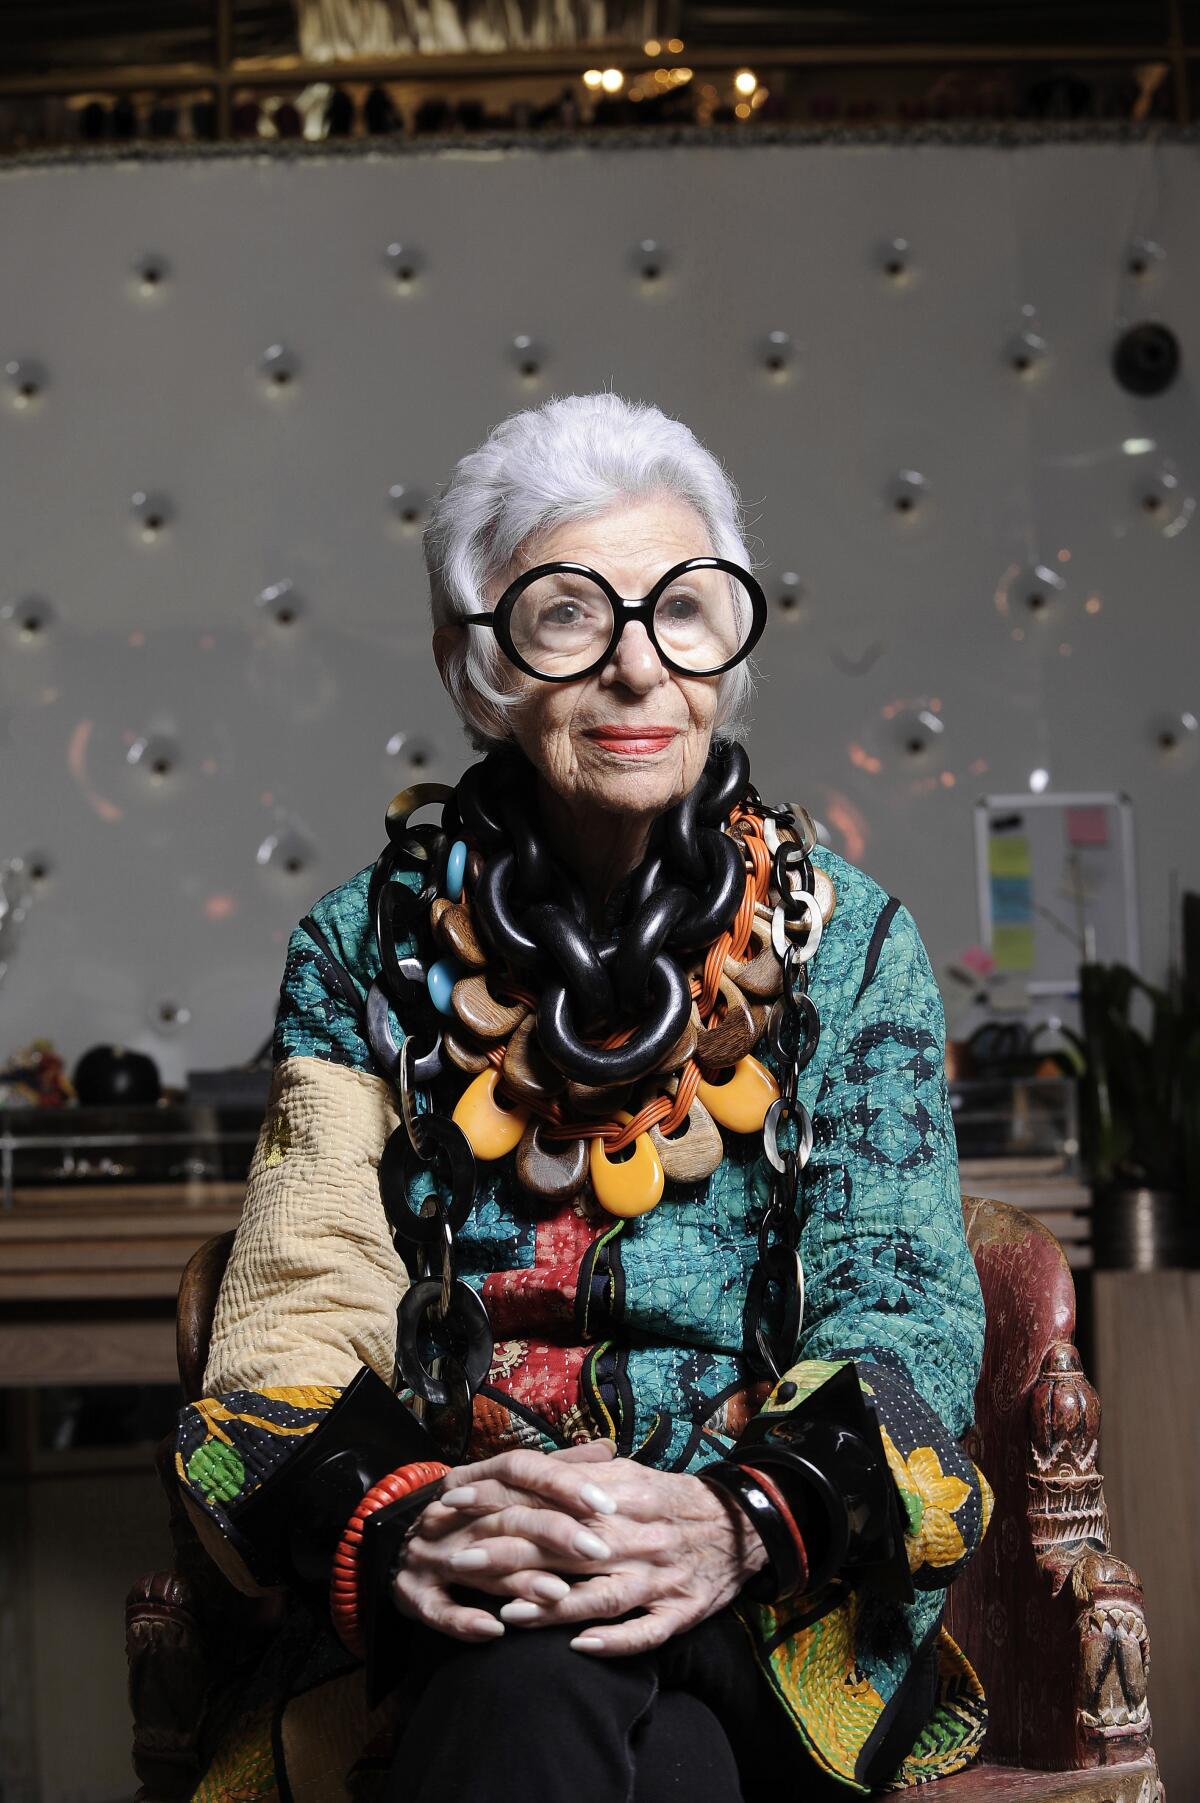 HOLLYWOOD, CA- April 27, 2015: Fashion icon Iris Apfel at The Way We Wore vintage store. (Mariah Tauger / For the Times)